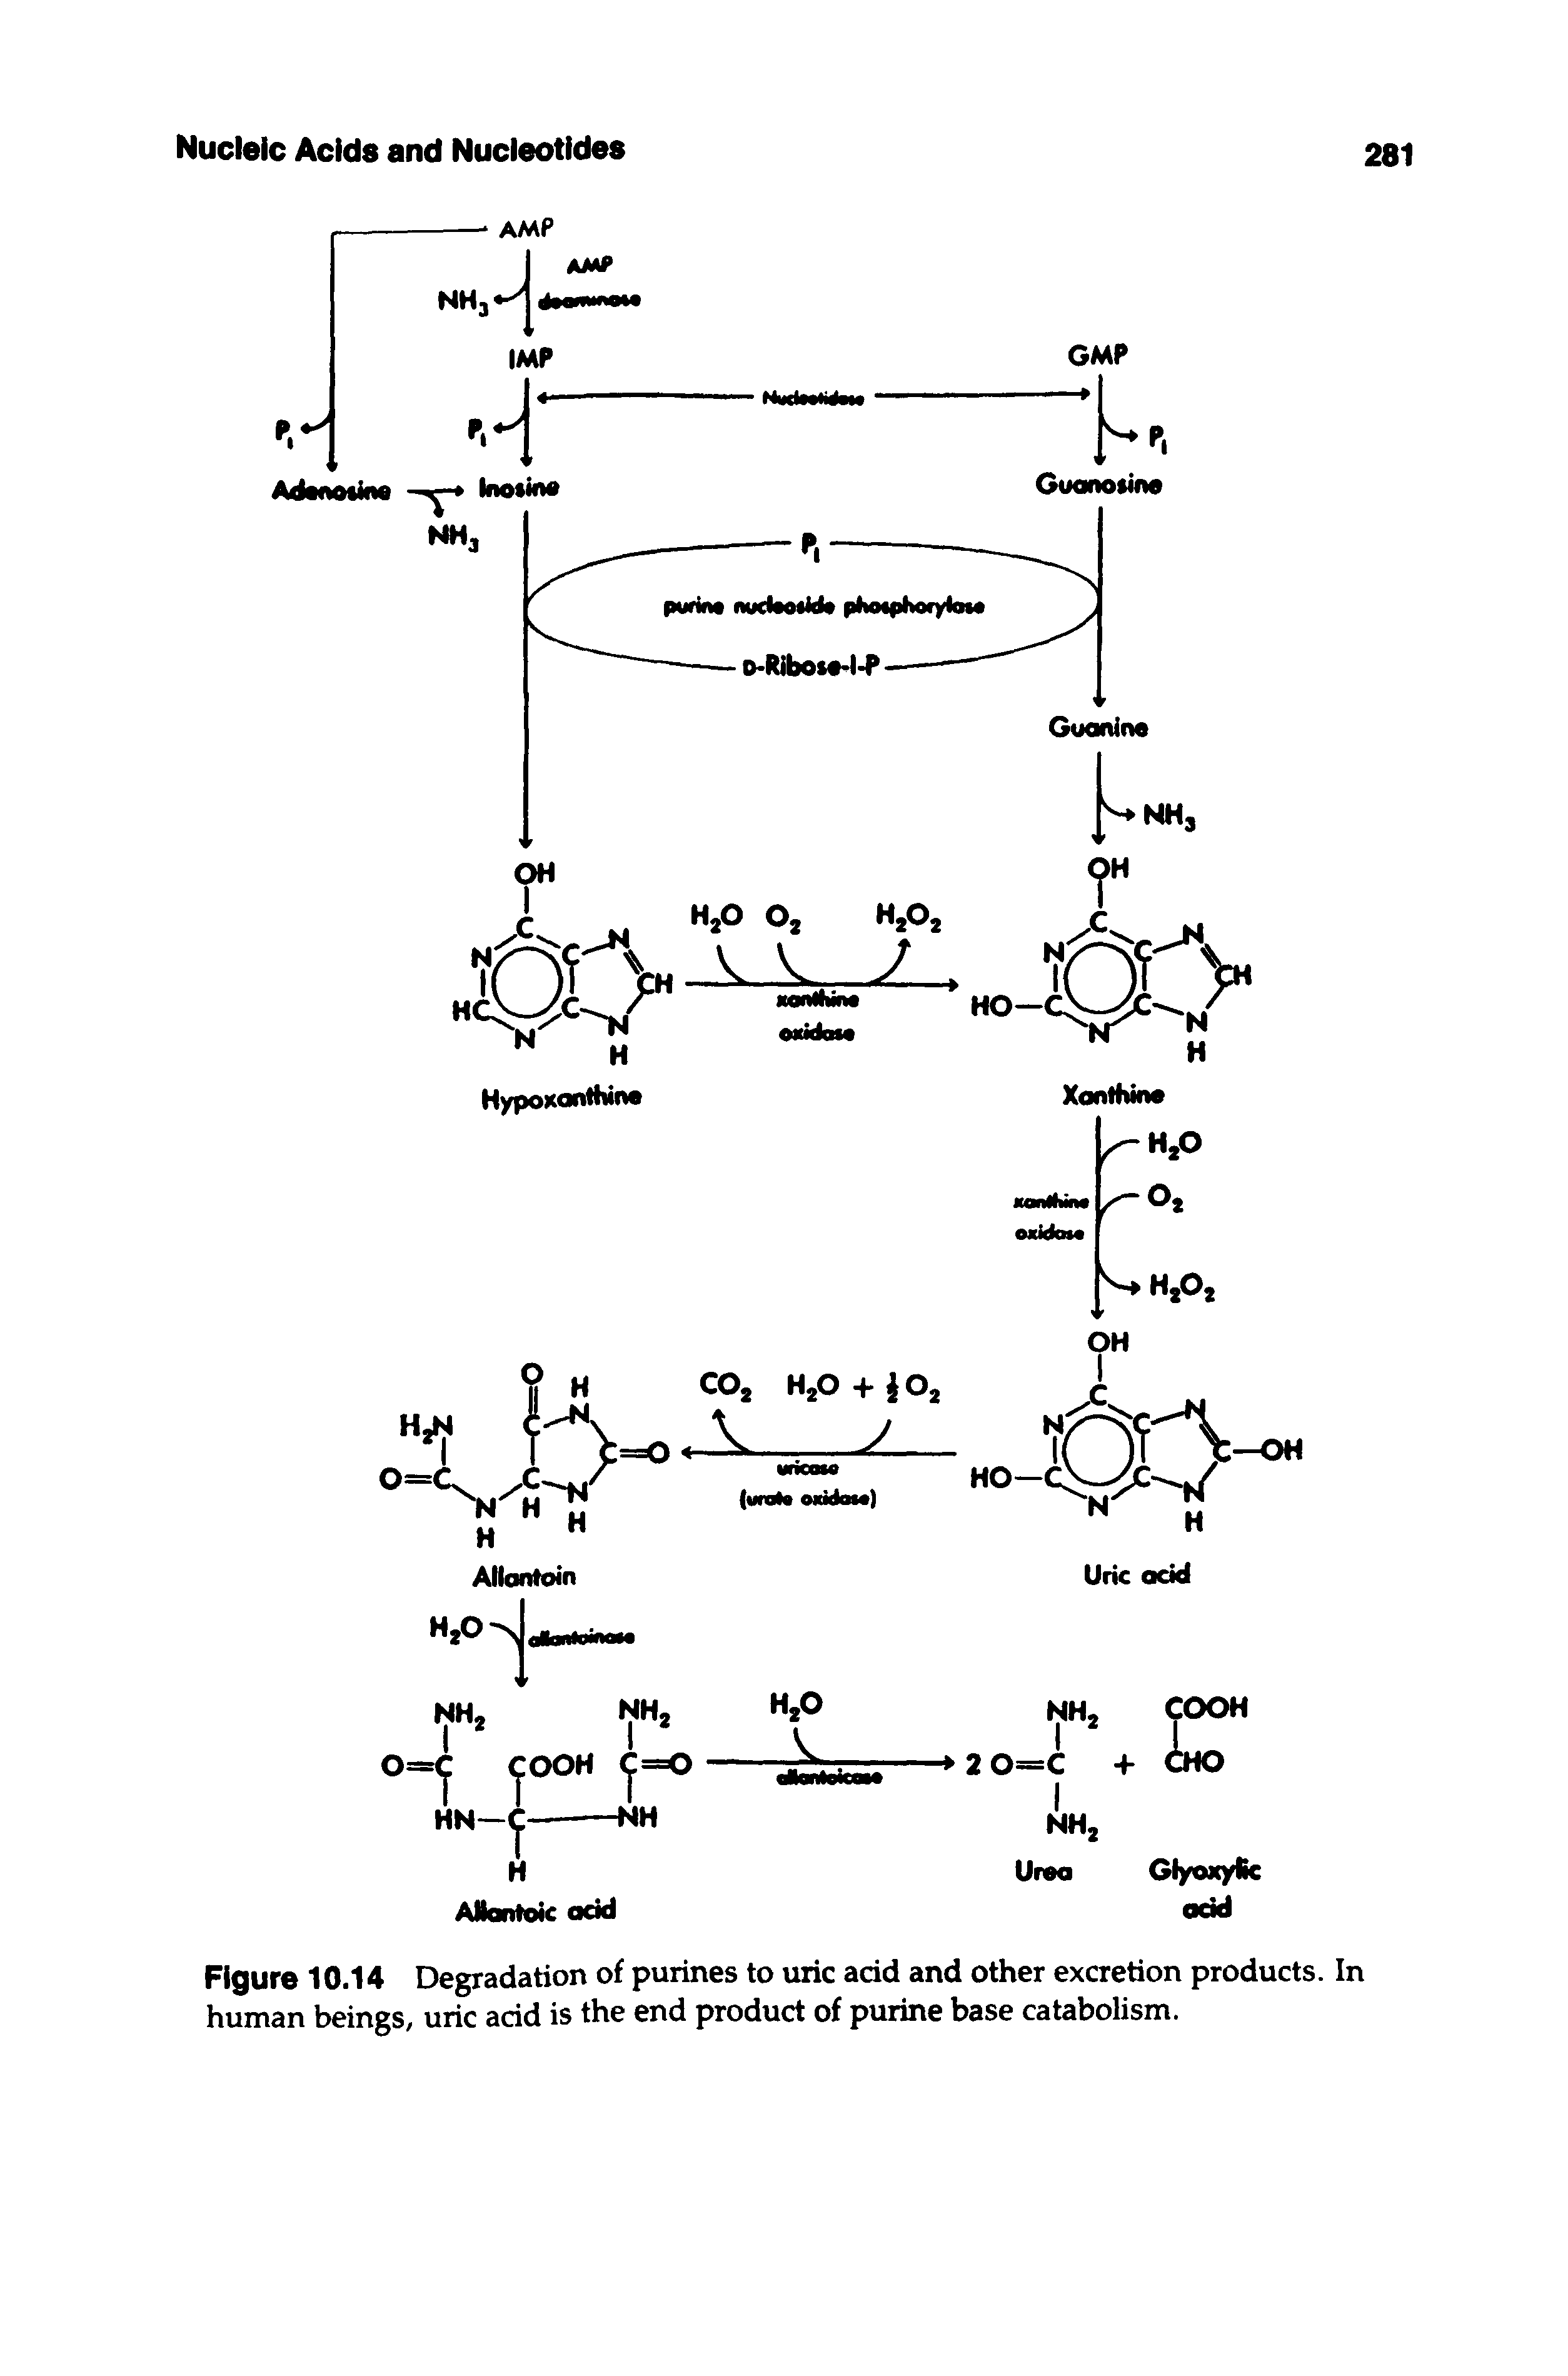 Figure 10.14 Degradation of purines to uric add and other excretion products. In human beings, uric add is the end product of purine base catabolism.